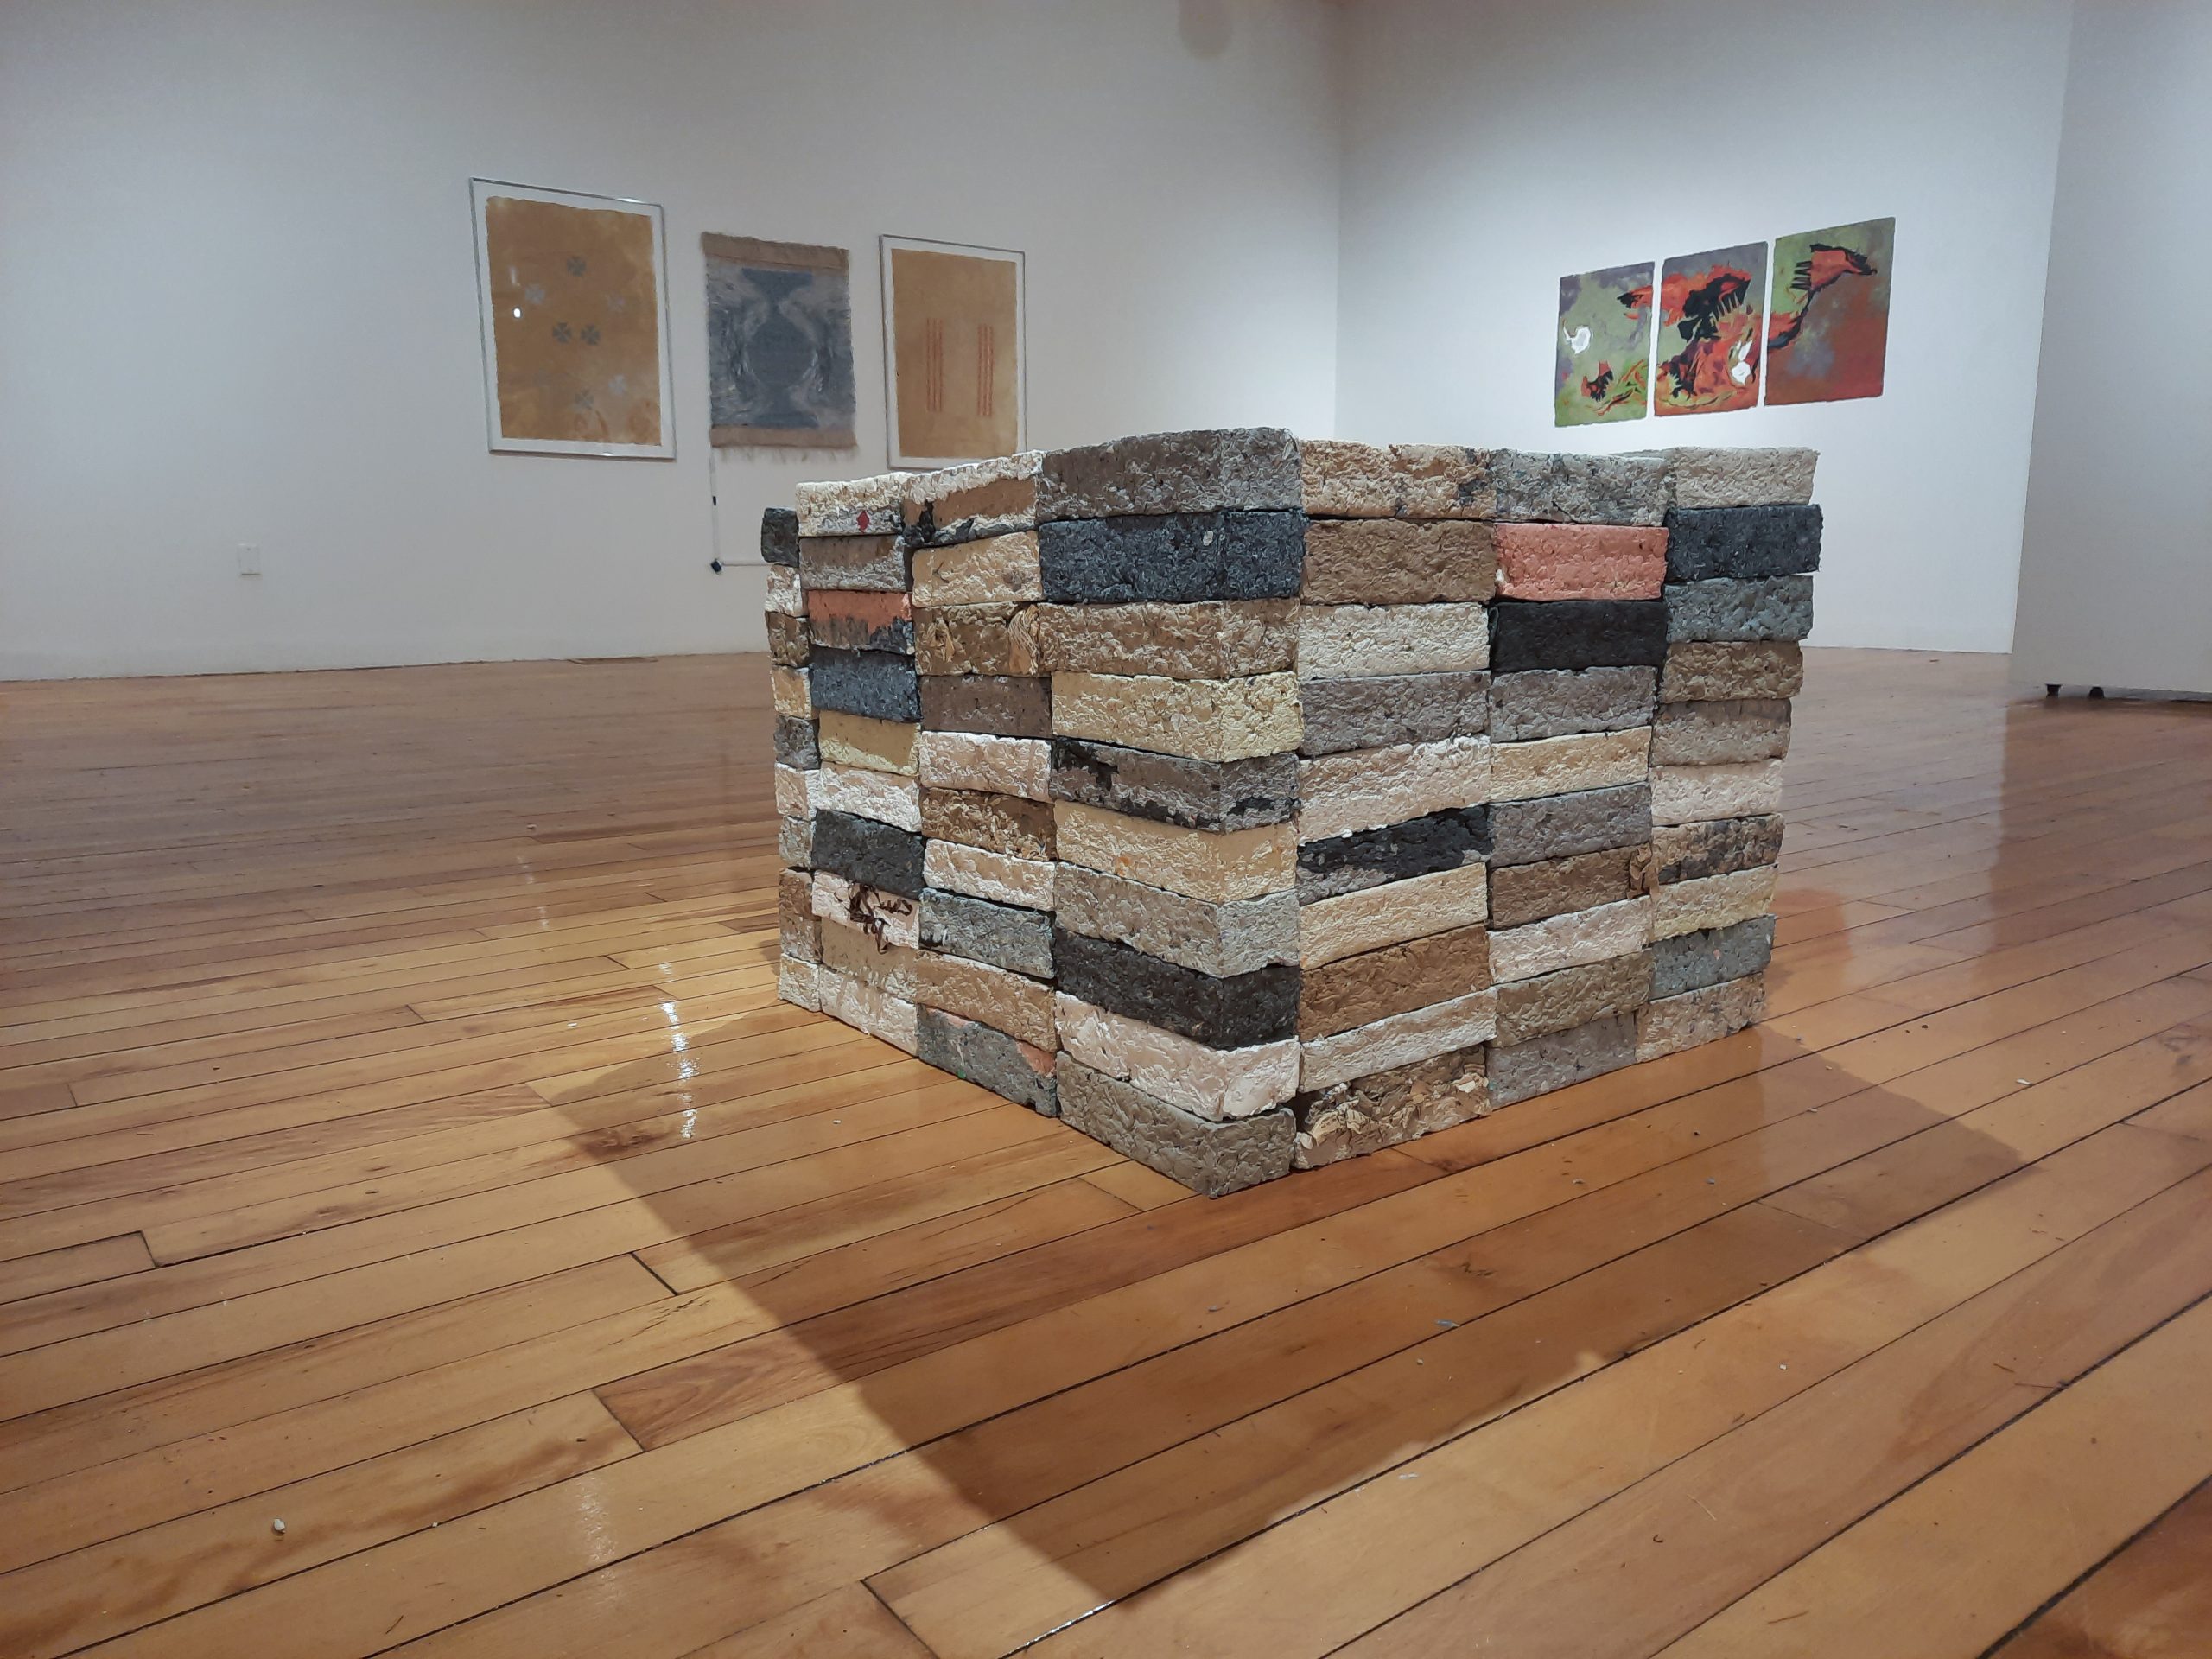 Jillian Bruschera, "Wastemade," 2014. Handmade paper bricks of waste collected by artist, dimensions variable. Part of "Pulped Under Pressure," University of Southern Maine Art Gallery, 2022.